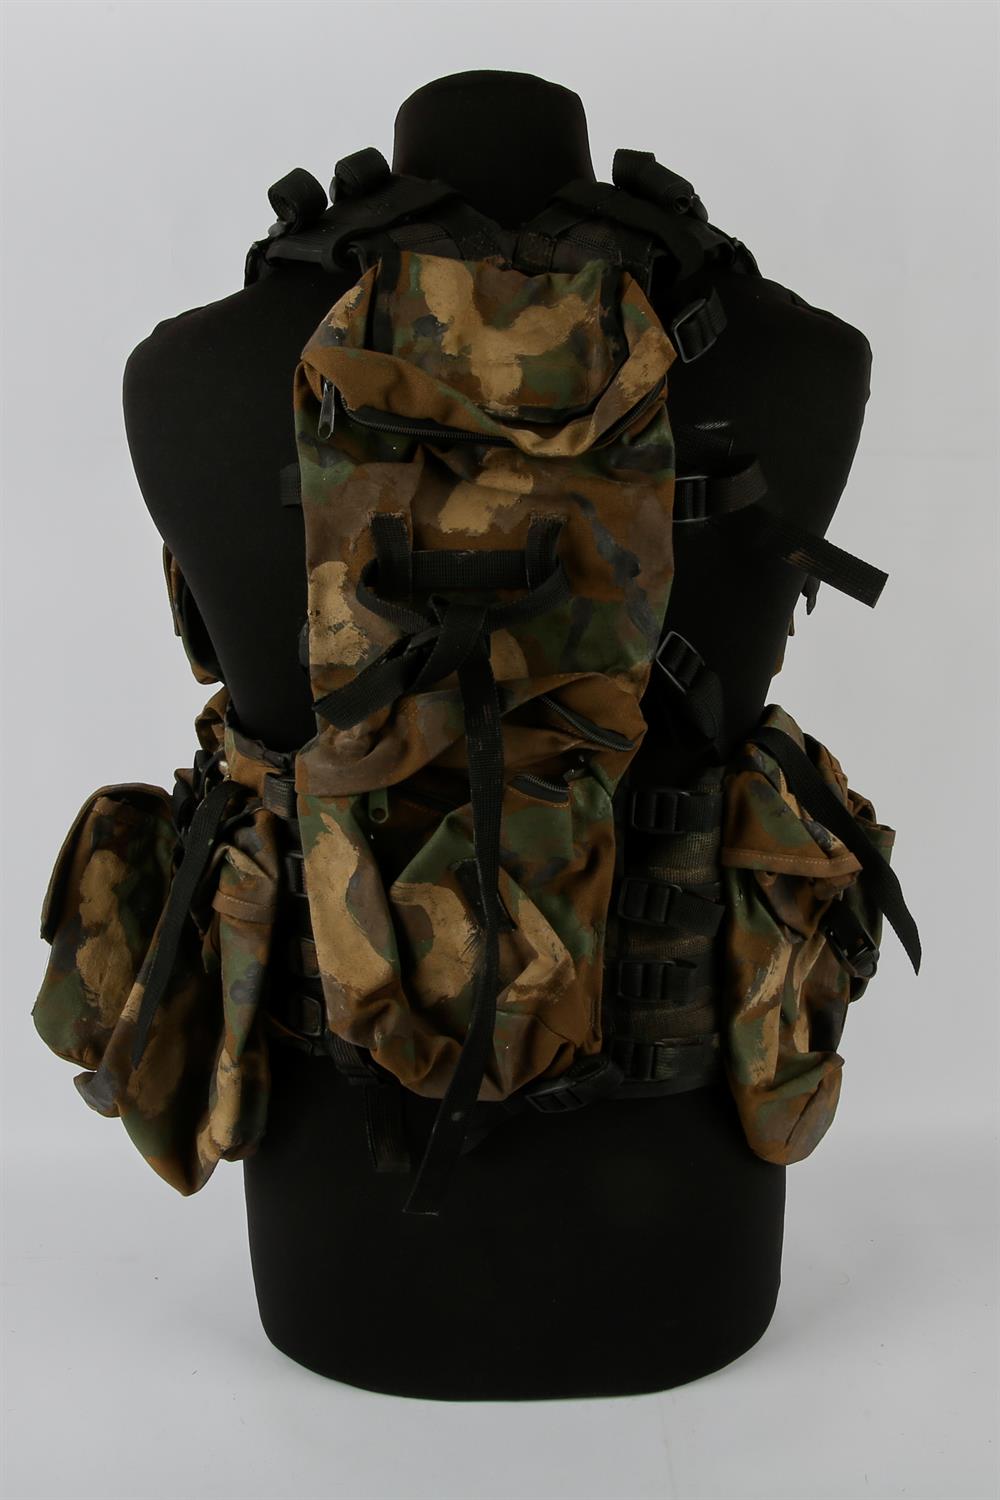 Doctor Who (TV) - Army Webbing worn by the security forces in the episode ‘Dalek’. - Image 2 of 2